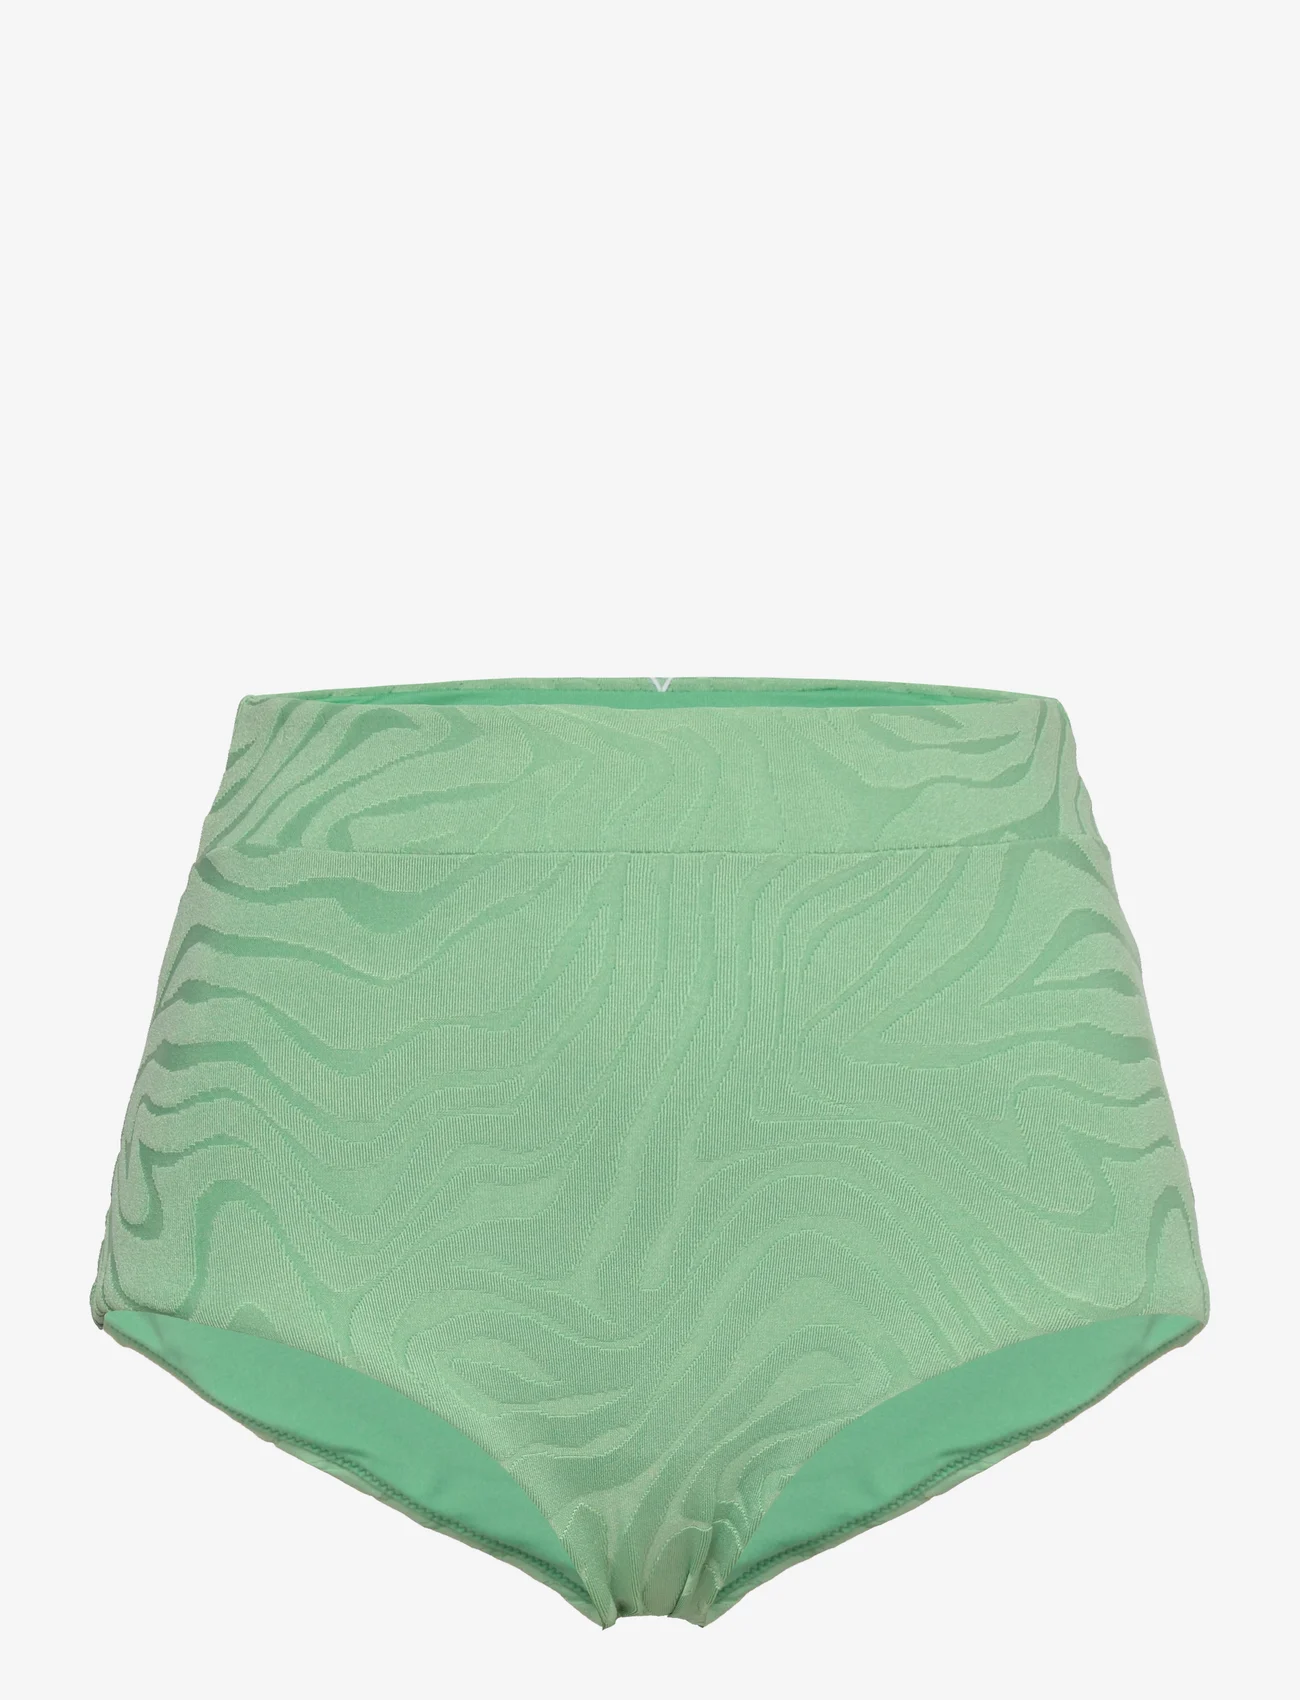 Seafolly - Second Wave High Waisted Pant - bikinihosen mit hoher taille - palm green - 0